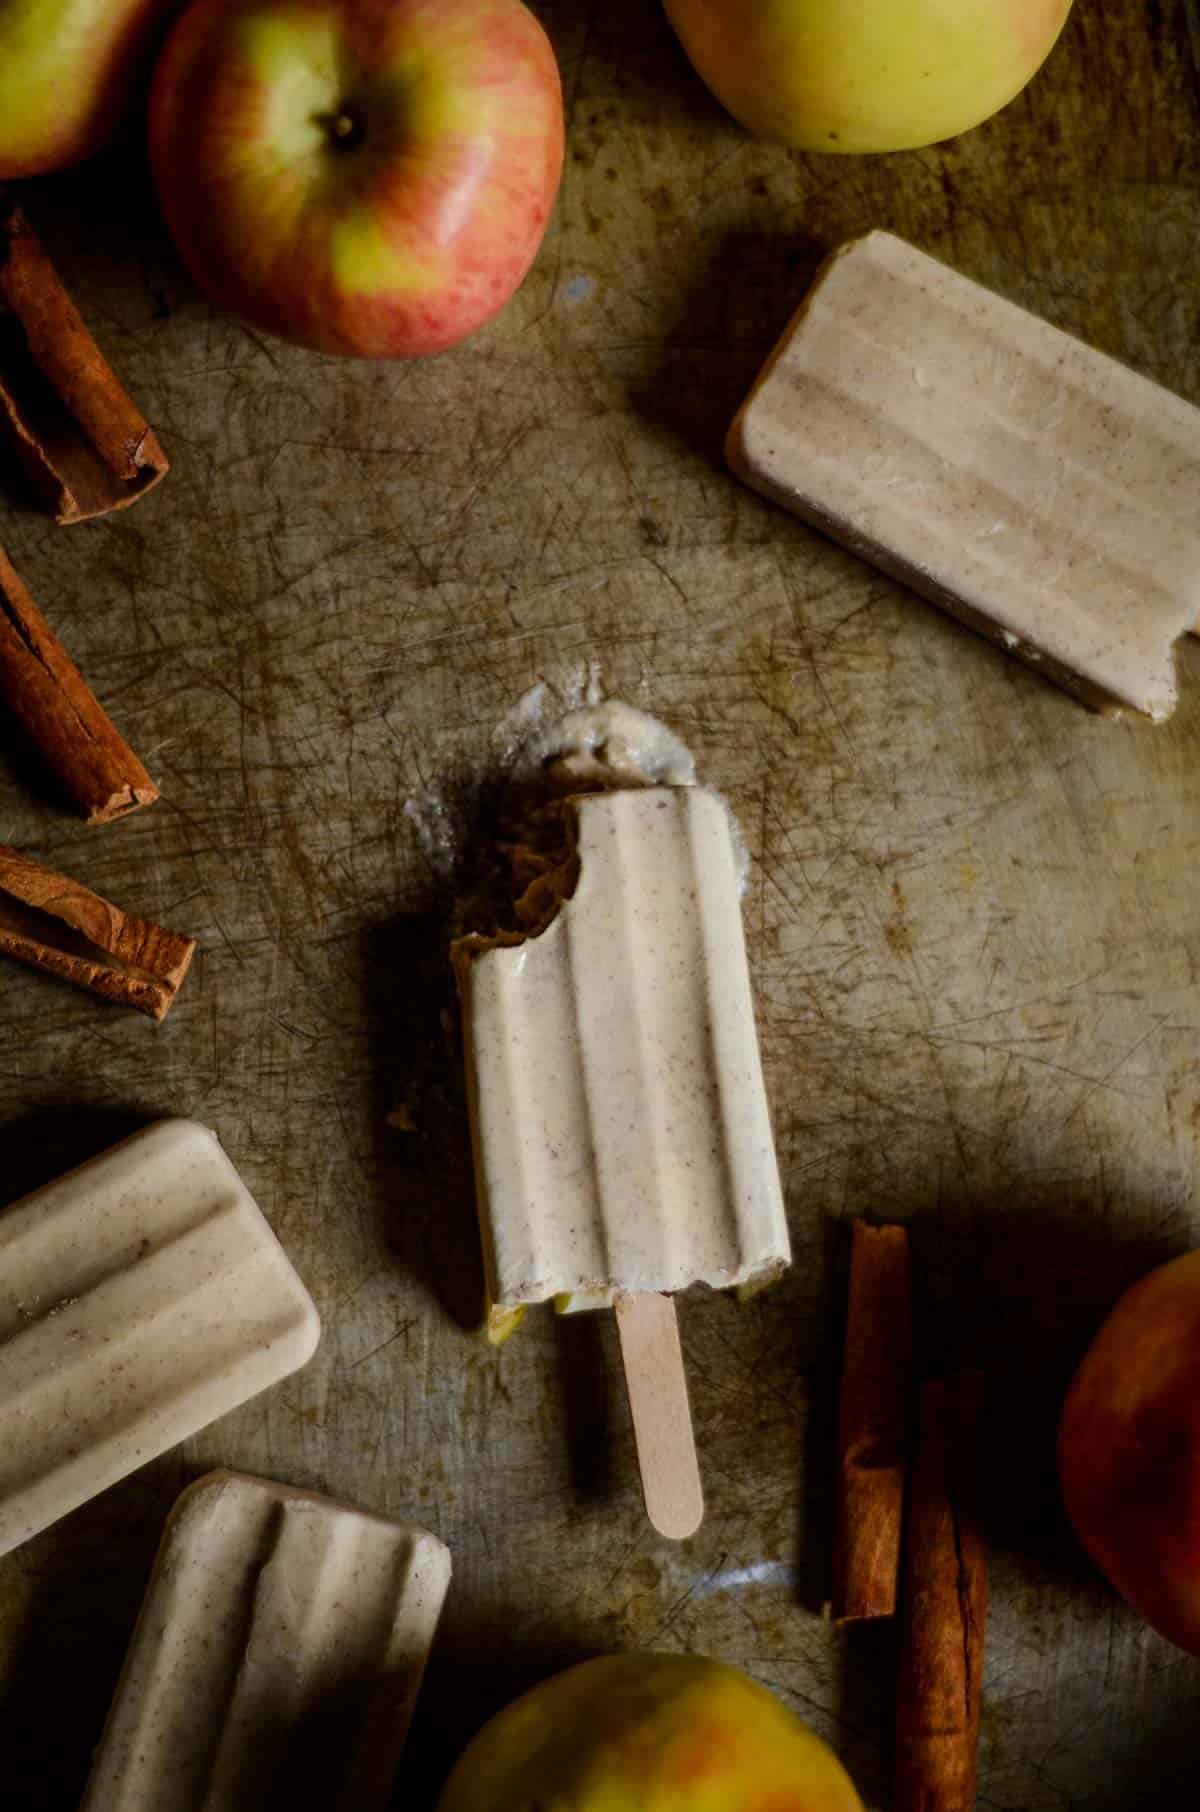 Beige popsicle with bite missing from it on the counter with apples.